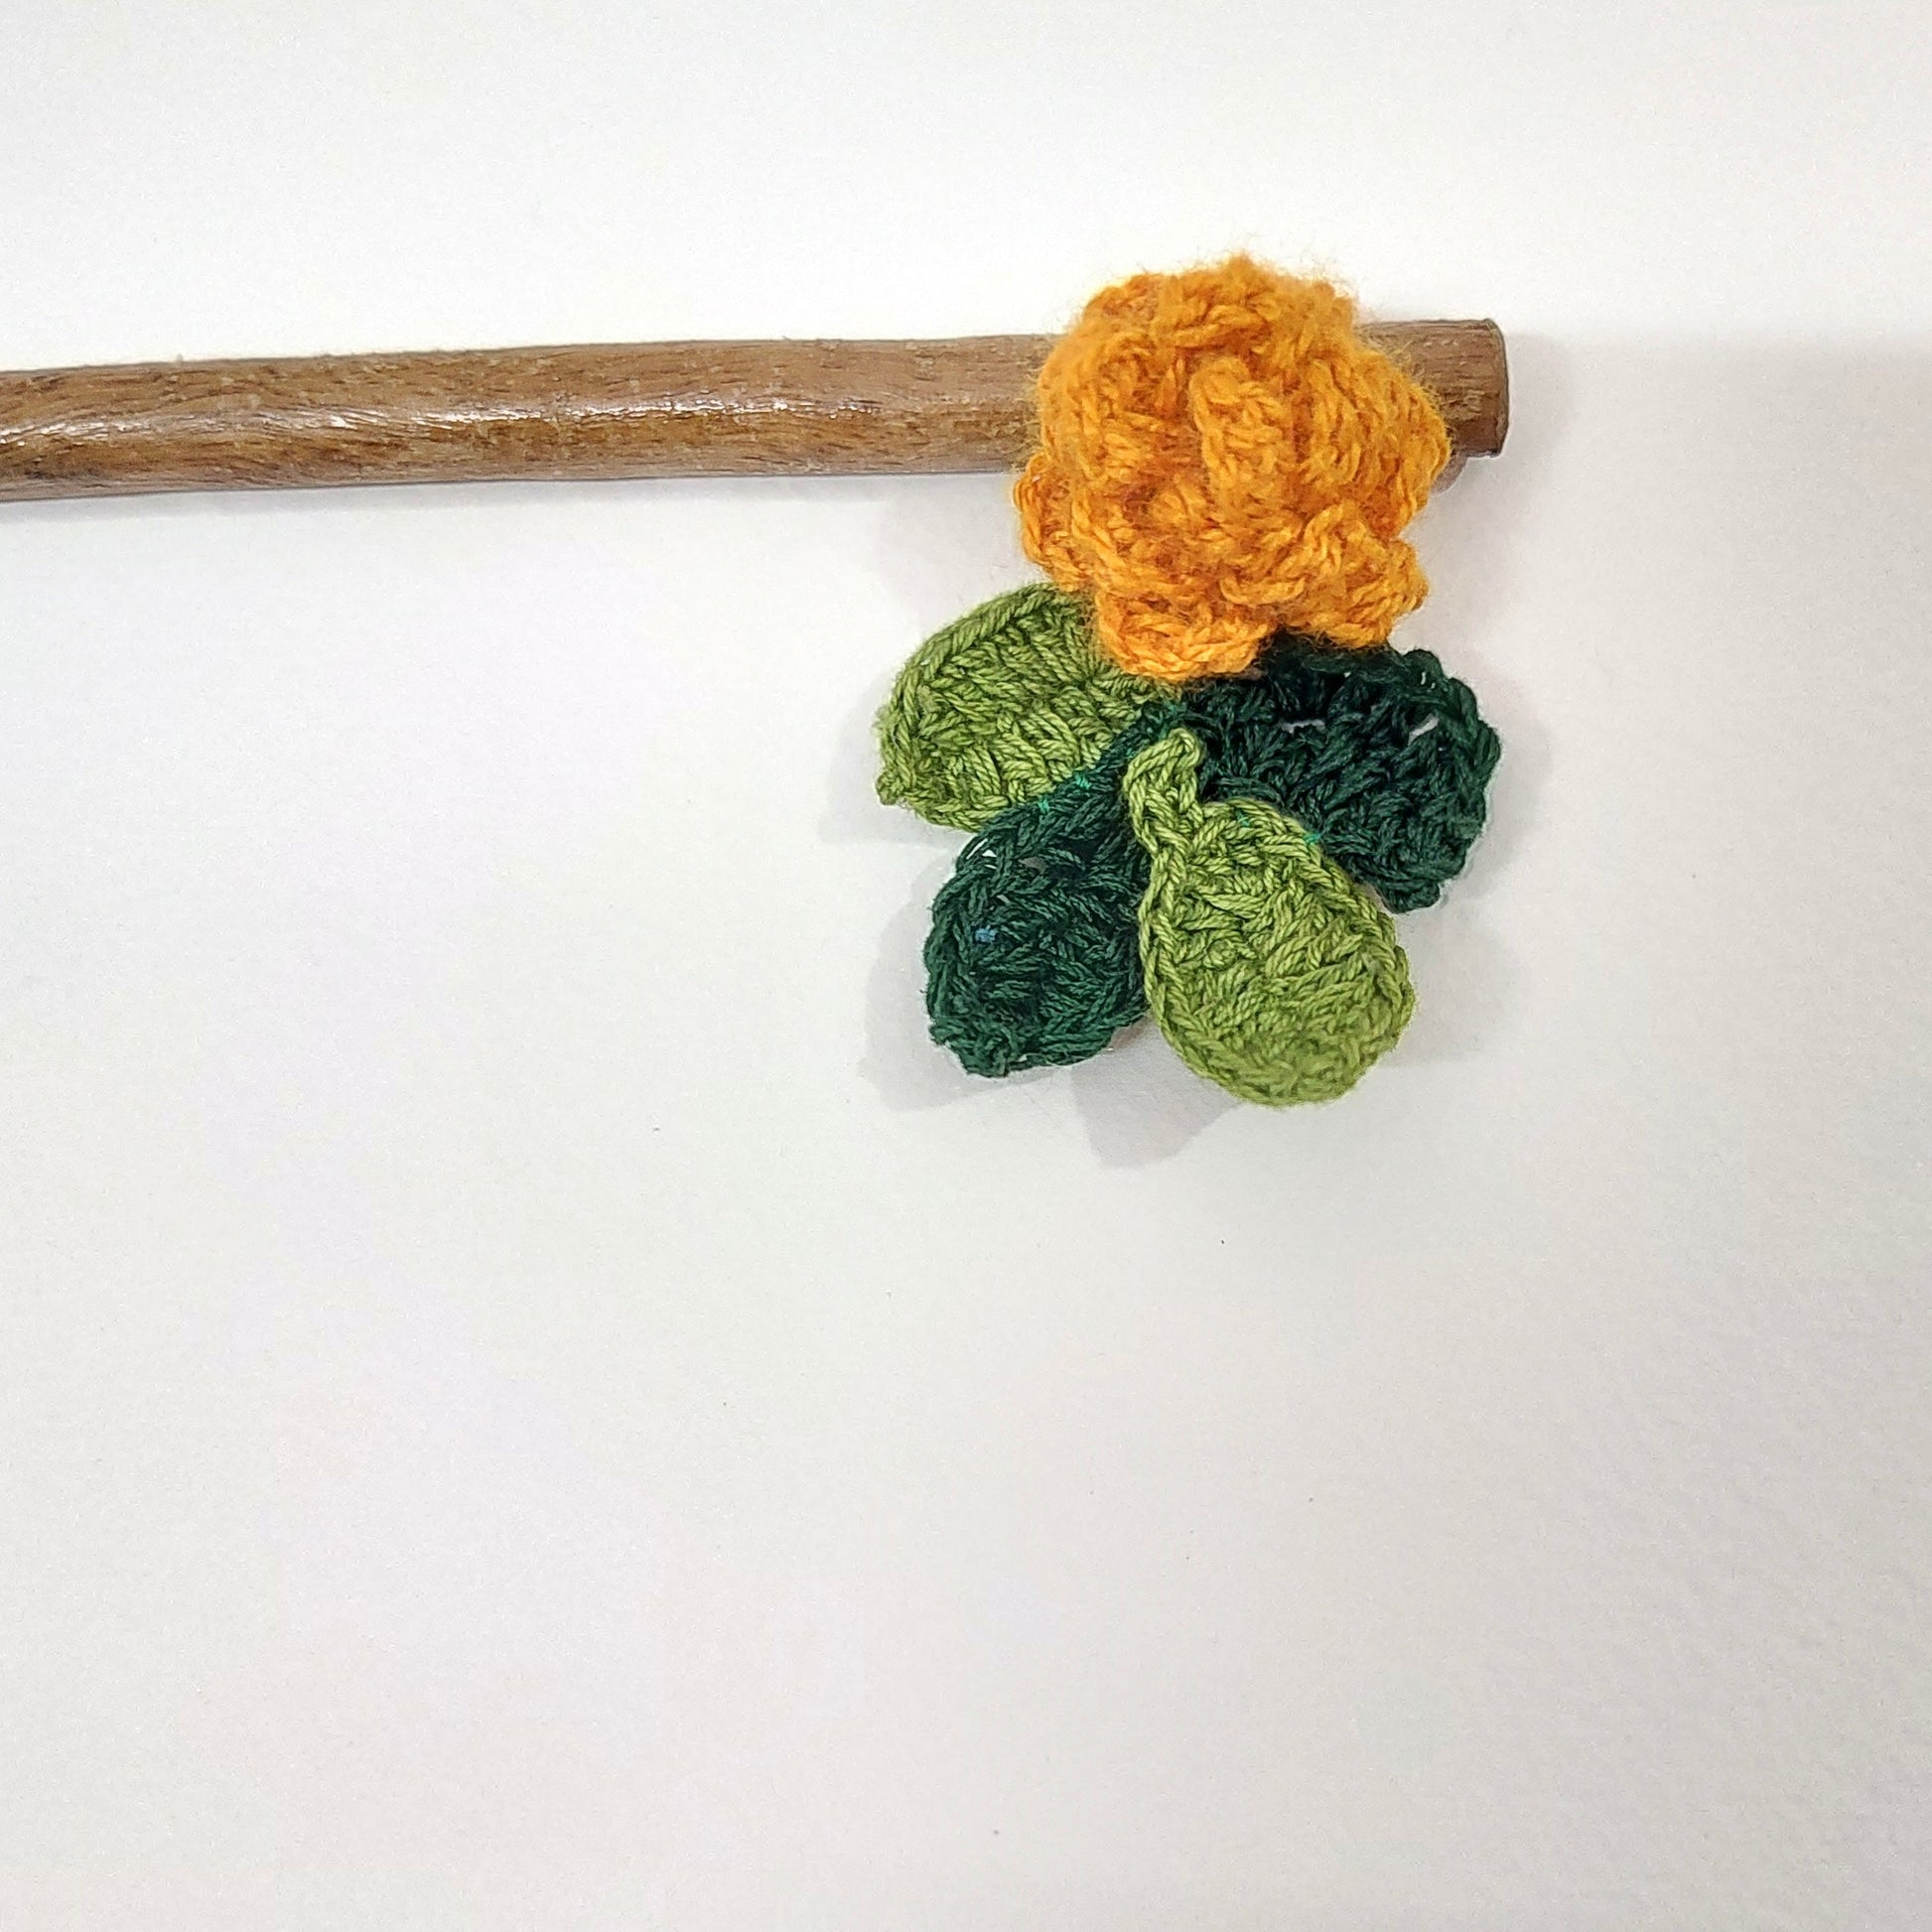 Wooden Hair Stick Marigold Orange by Ikriit'm with Cotton Yarn, Free Size, Hair Stick, Ikriit'm, Made from Natural Materials, Orange, Women Led Designer at Kamakhyaa for sustainable fashion